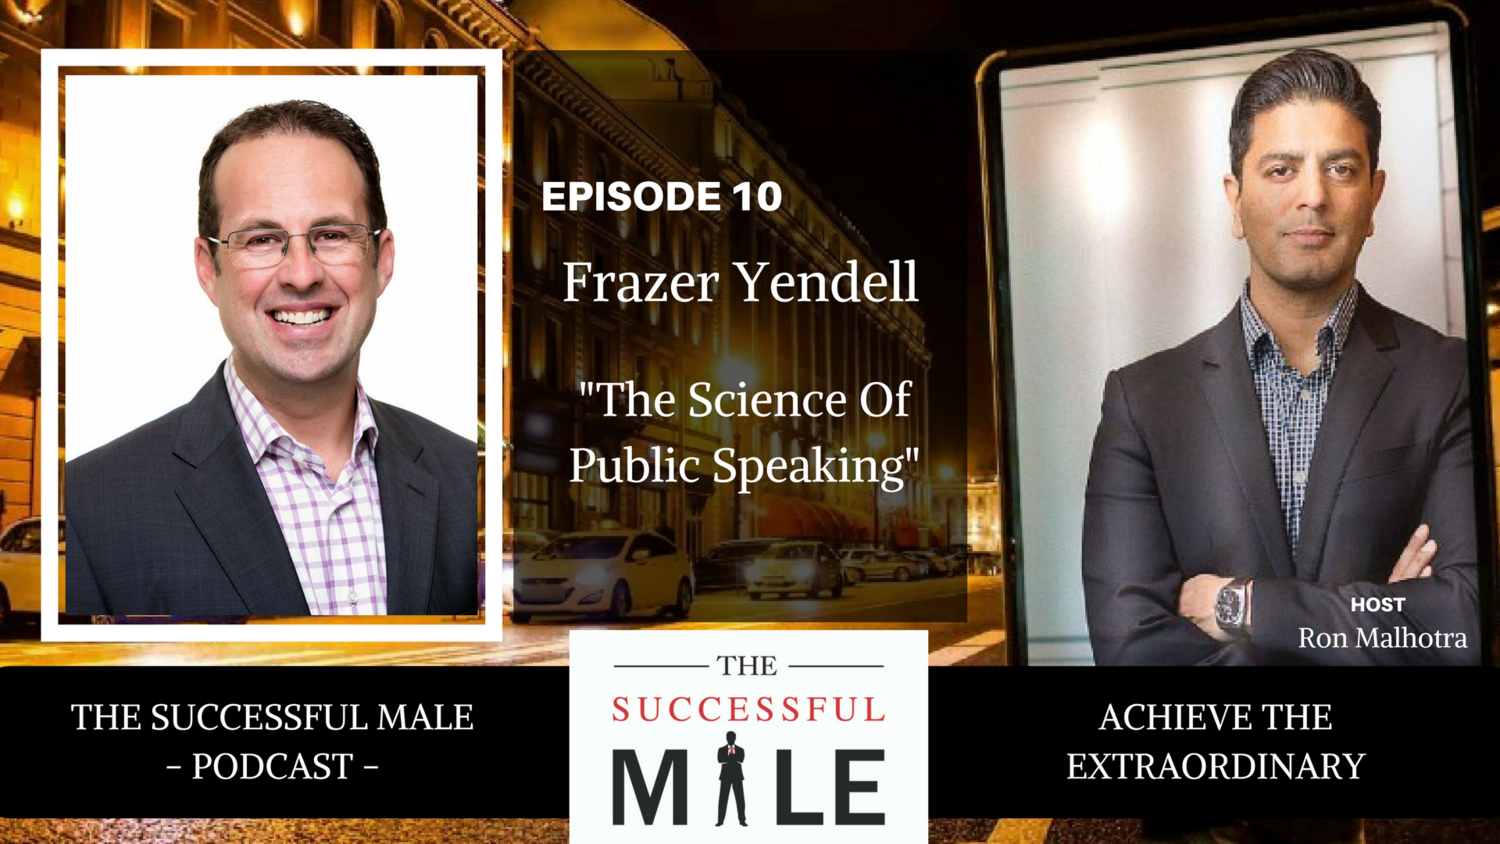 The Science Of Public Speaking with Frazer Yendell